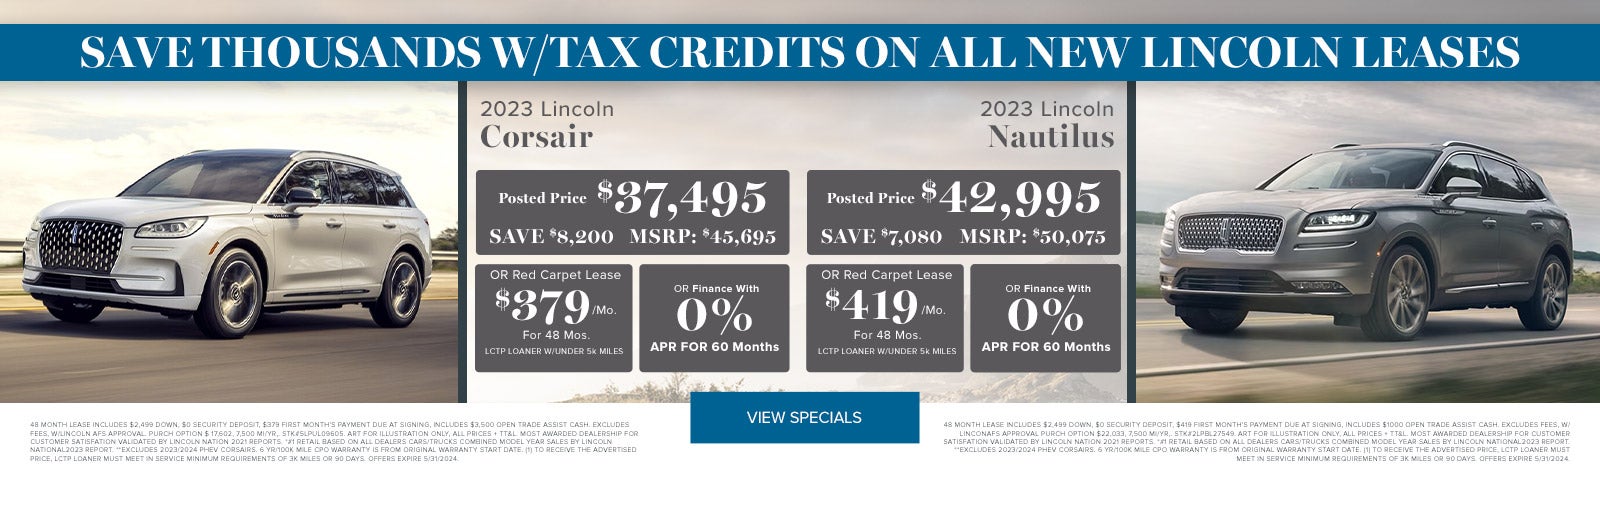 2023 Lincoln Corsair and Nautilus 0% for 60 months May24